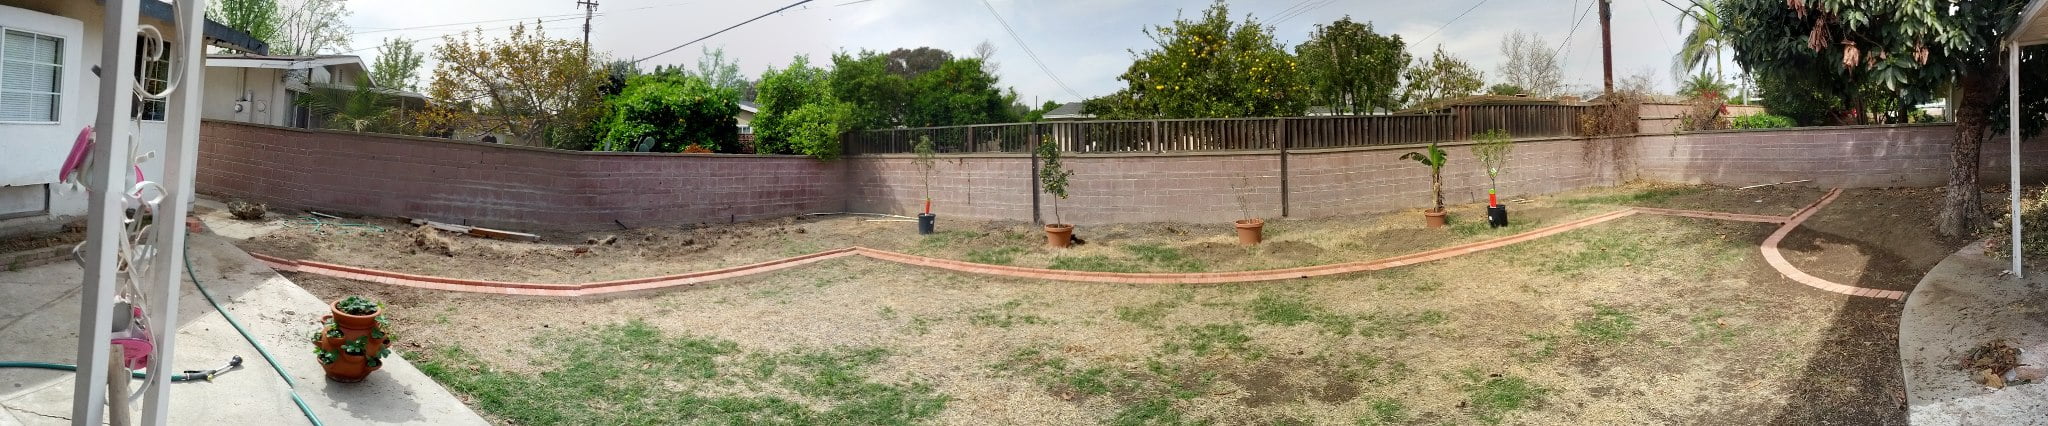 New irrigation and brick lawn edging ... after many...